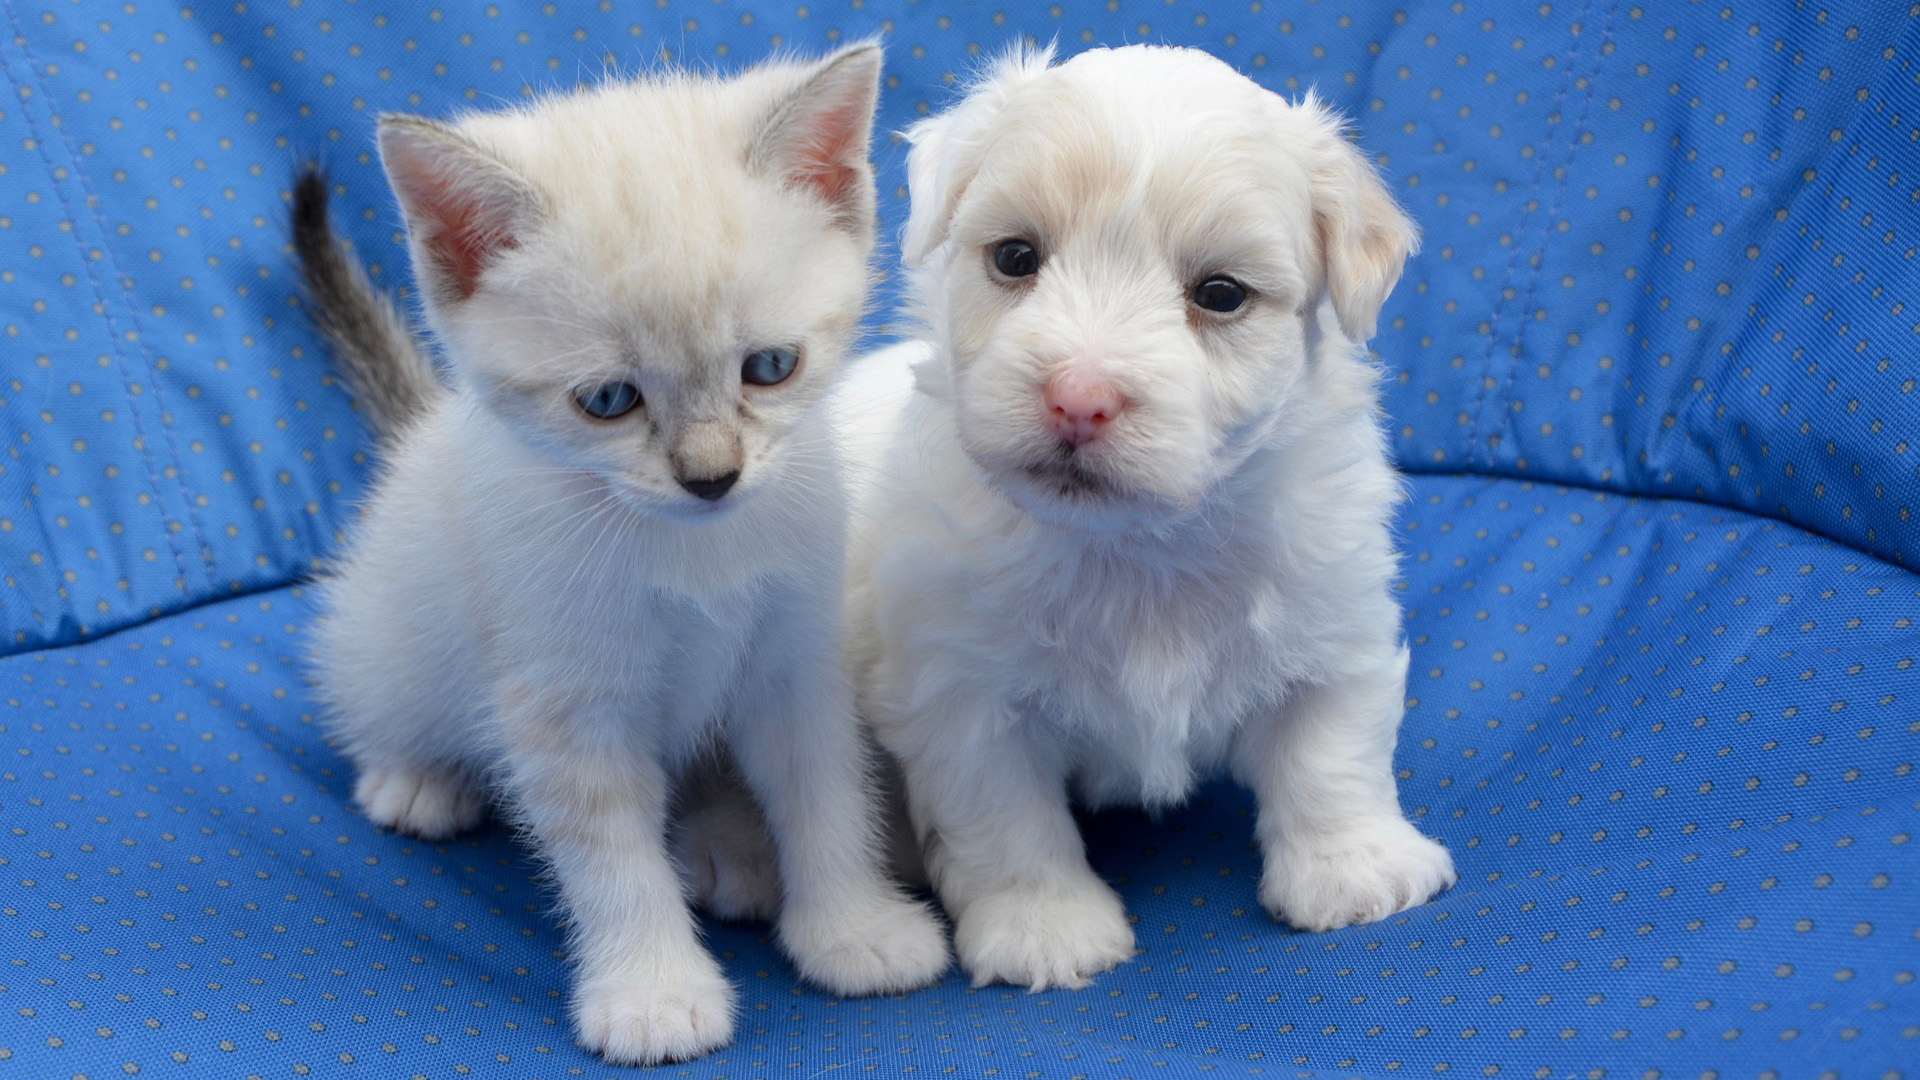 White kitten and puppy on a blue pet bed.